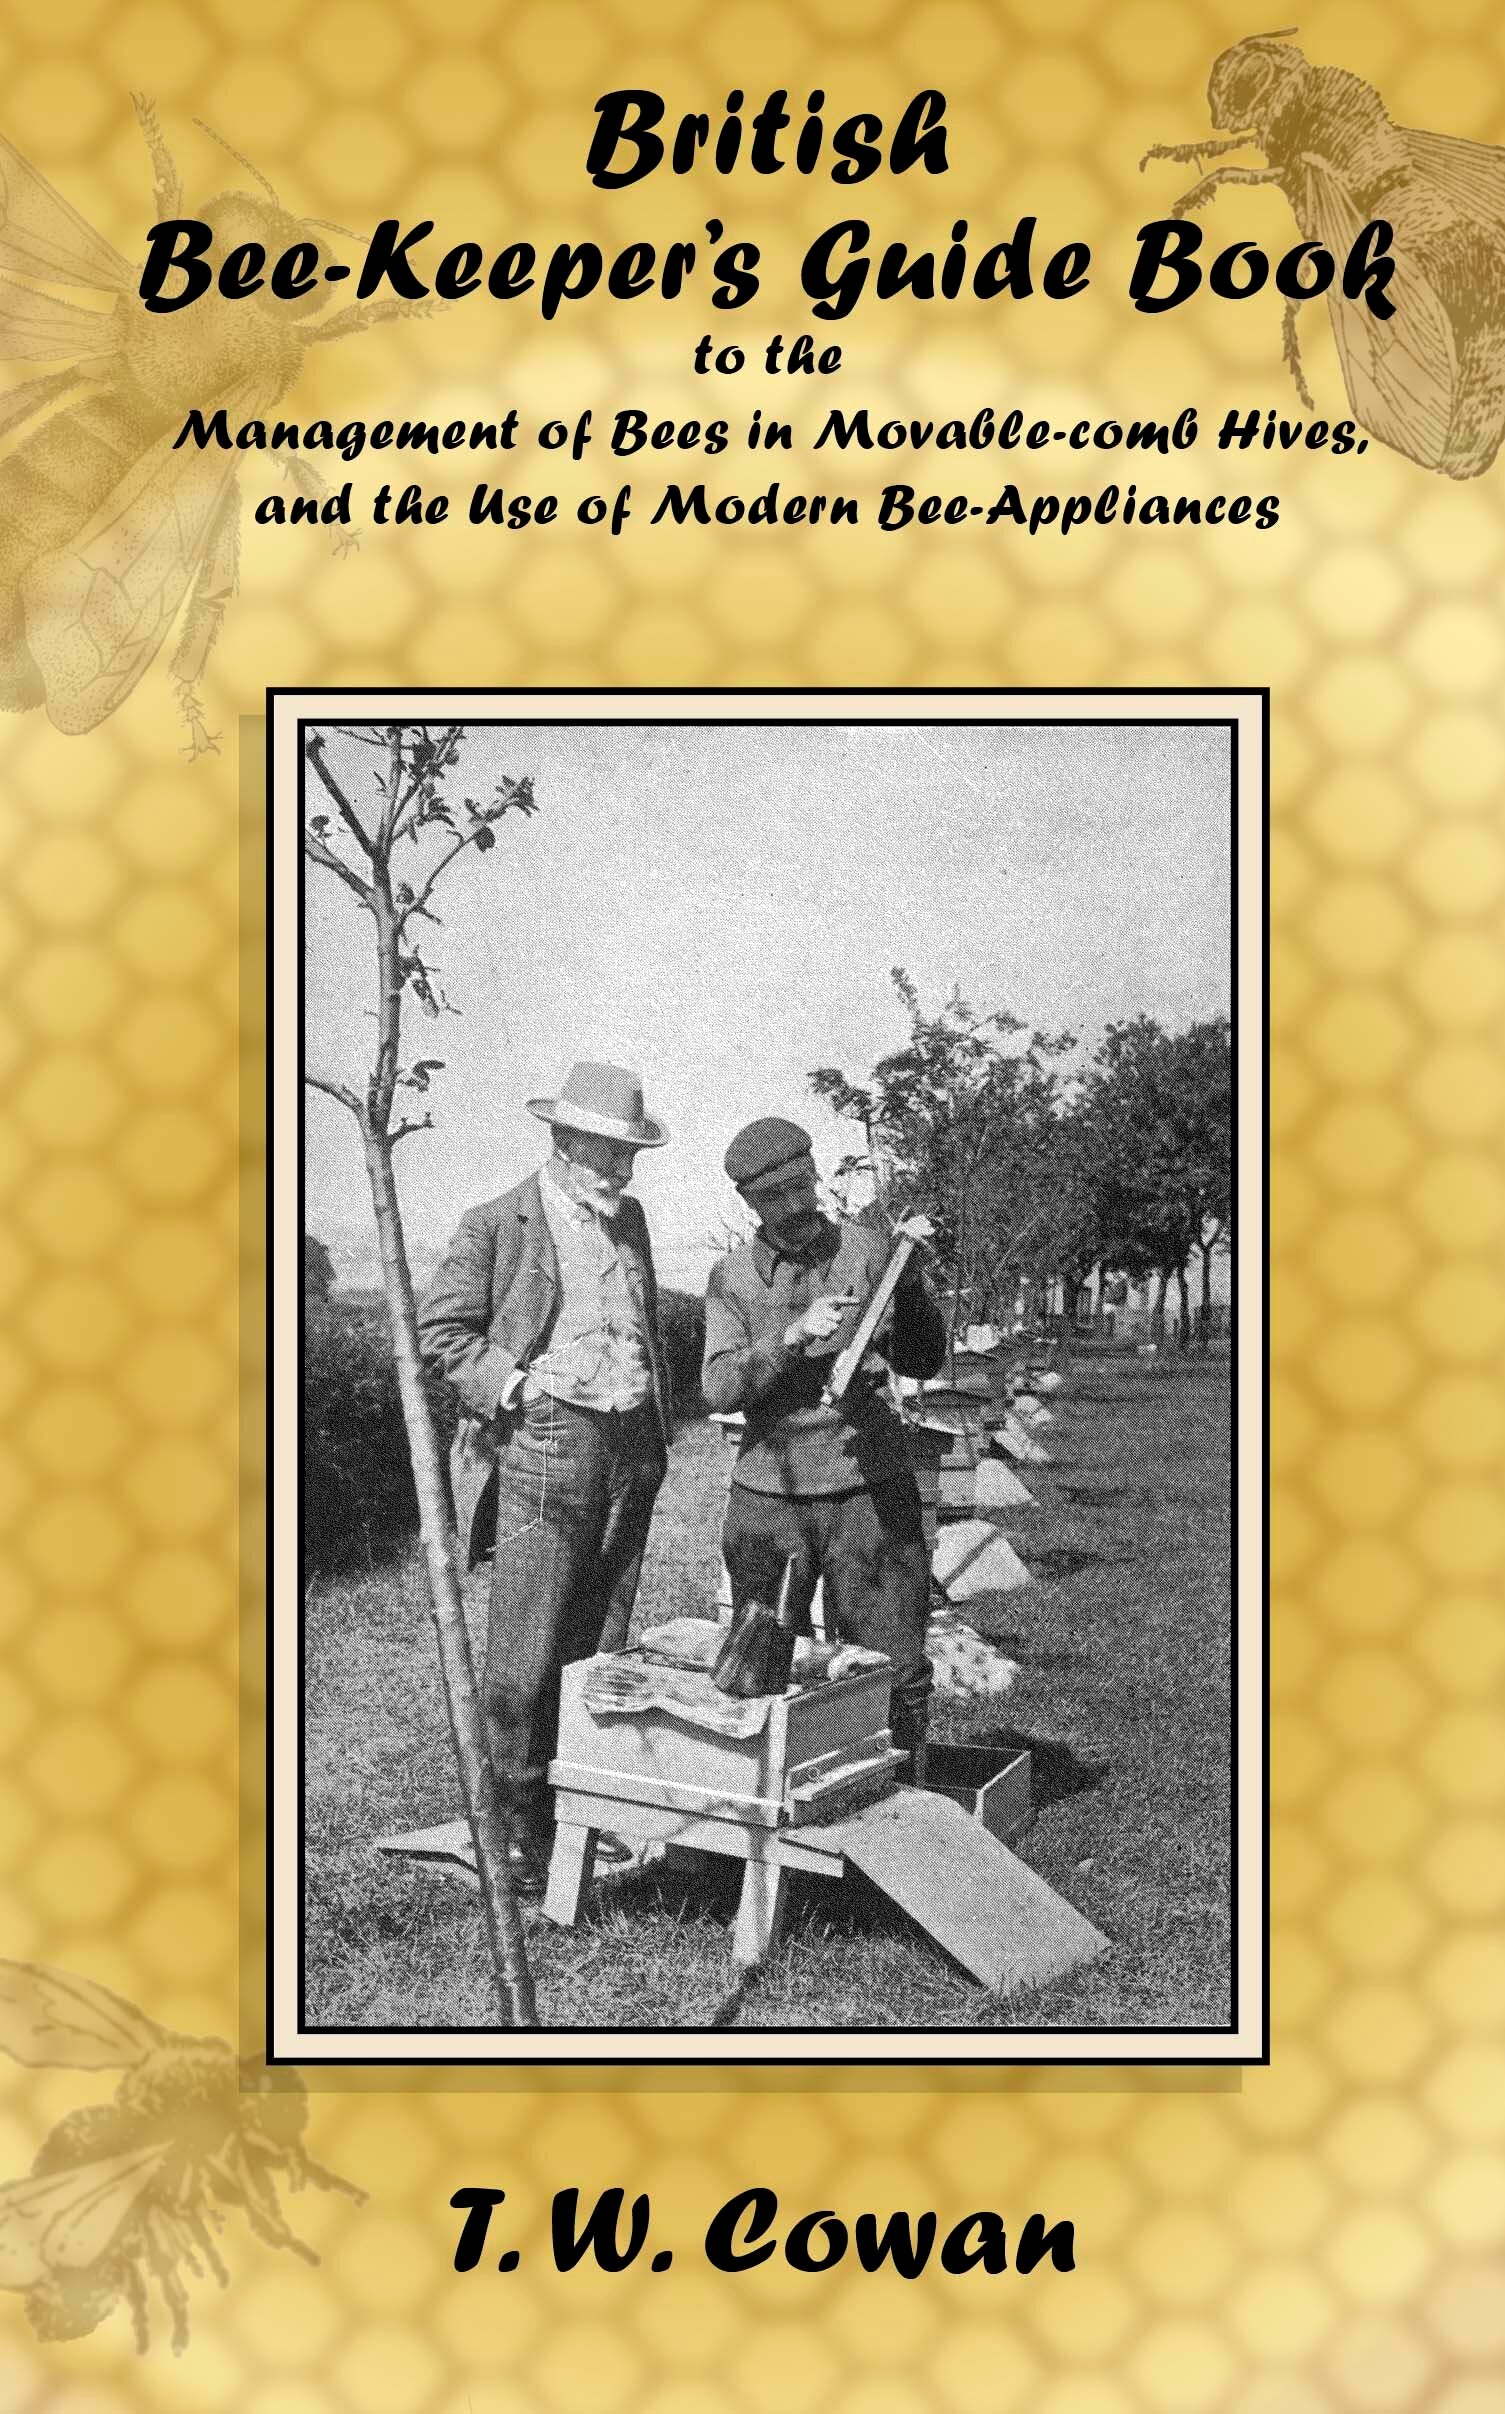 British Bee-Keeper's Guide Book